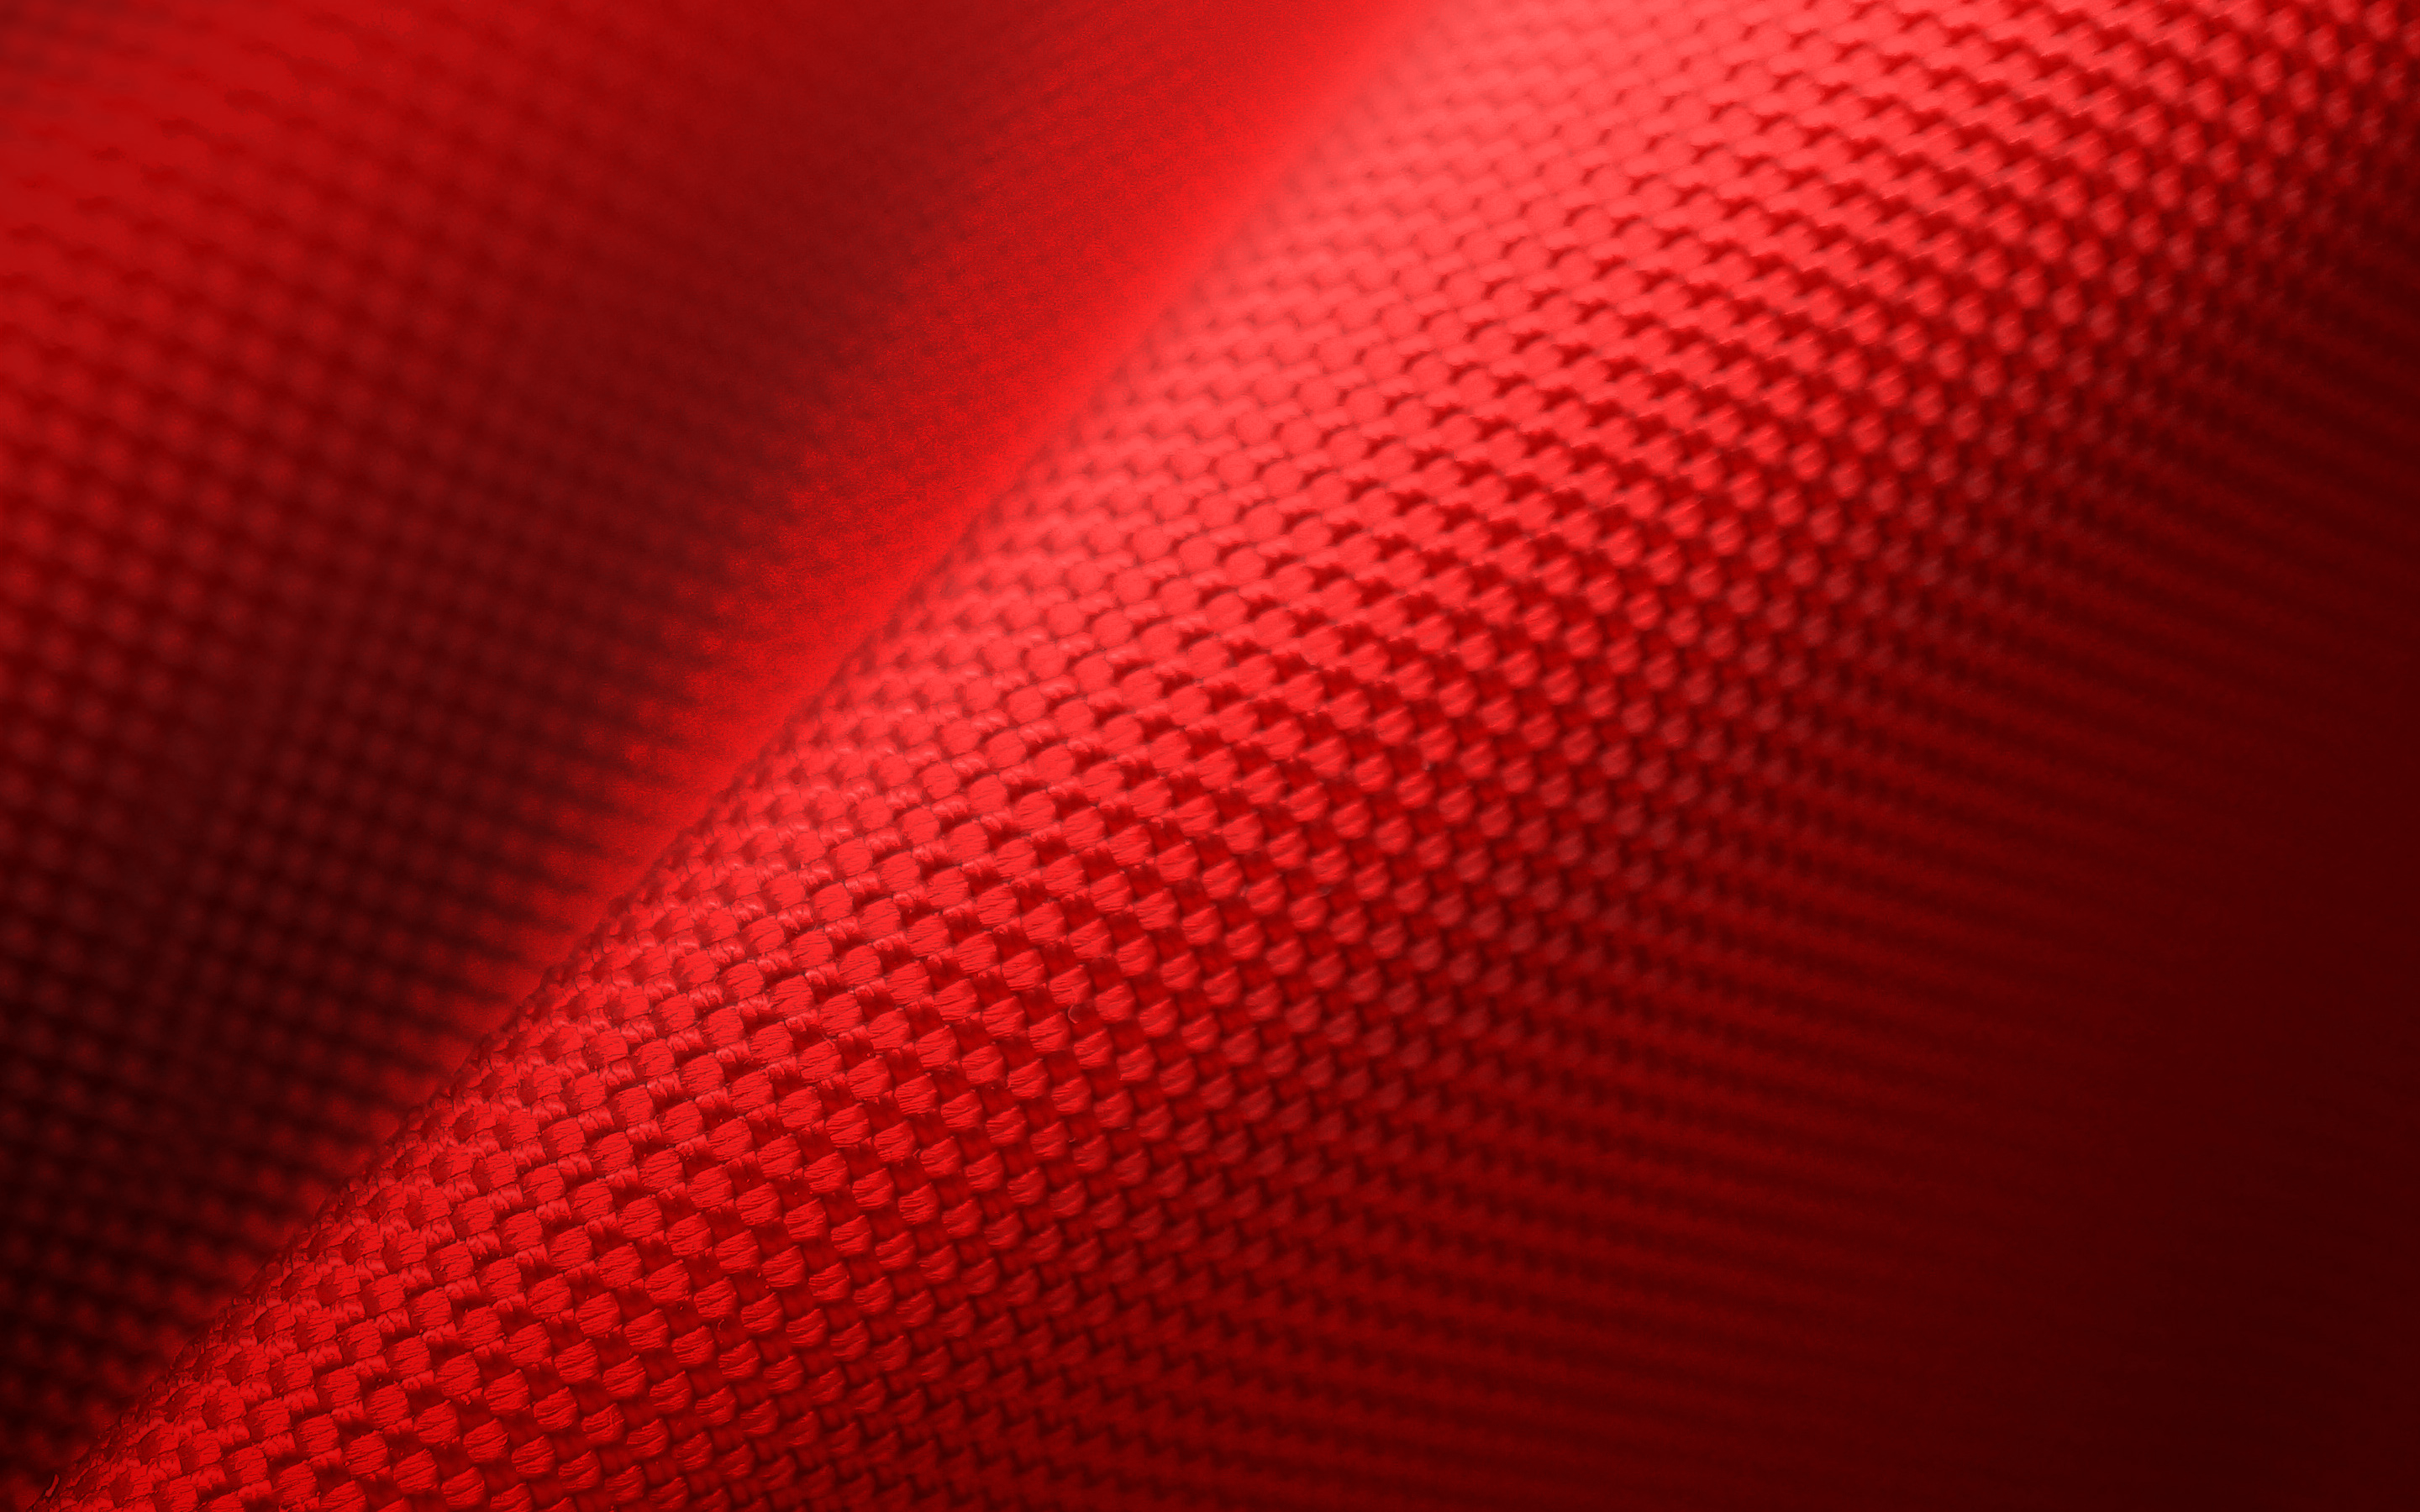 General 2880x1800 fabric red texture